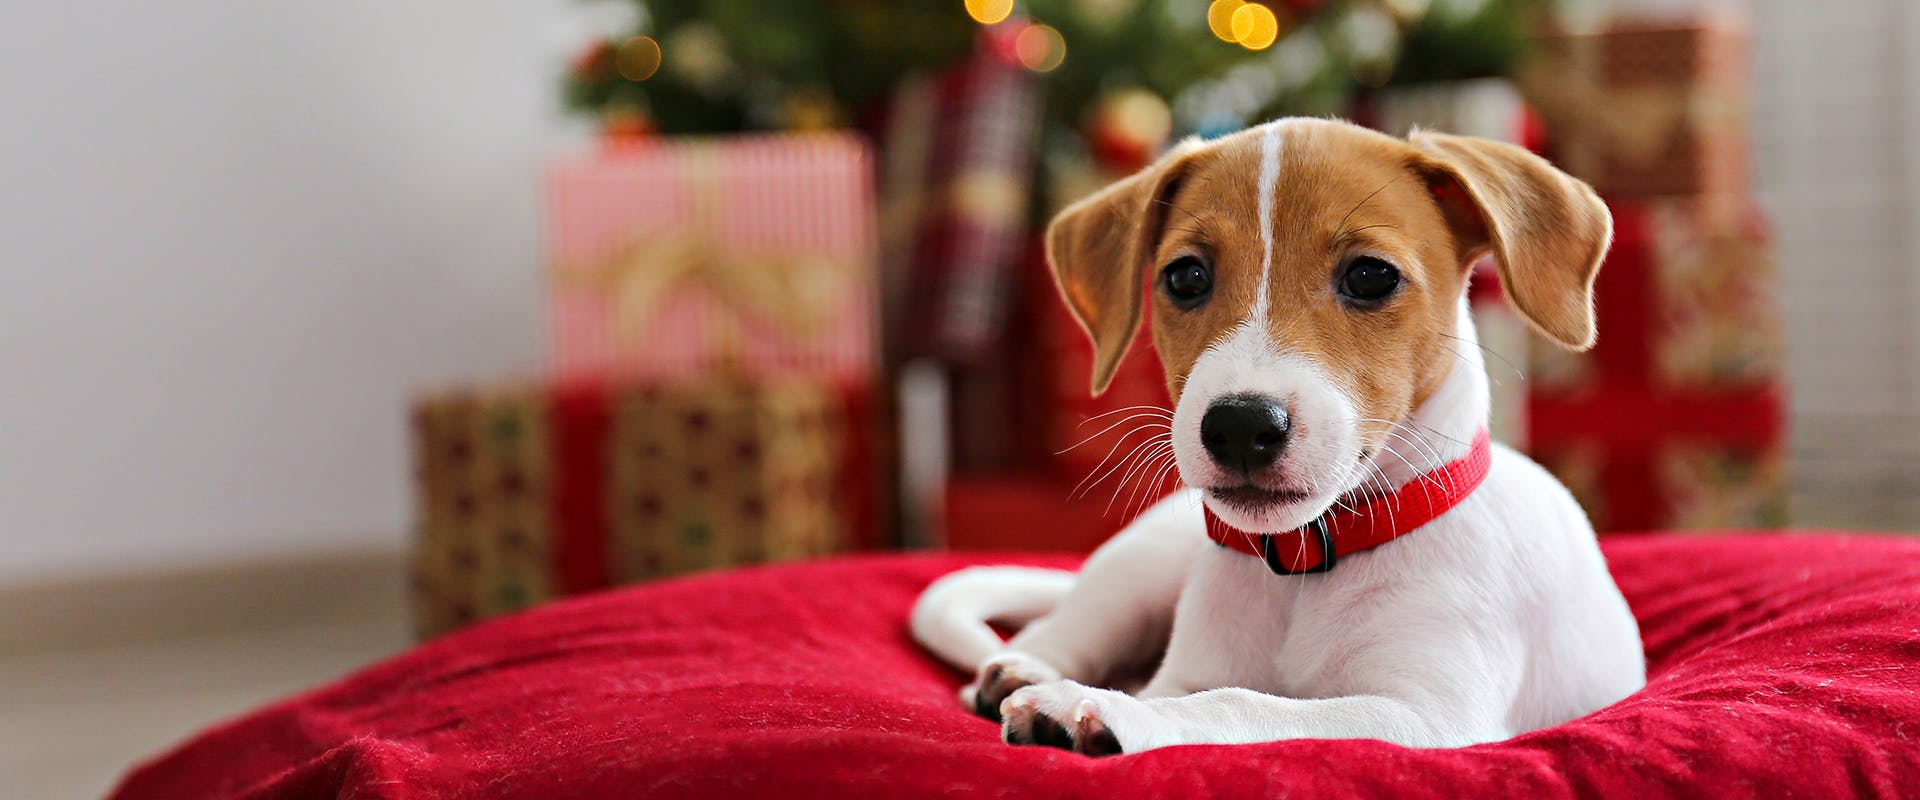 A small dog sitting on a red cushion, a Christmas tree and present in the background